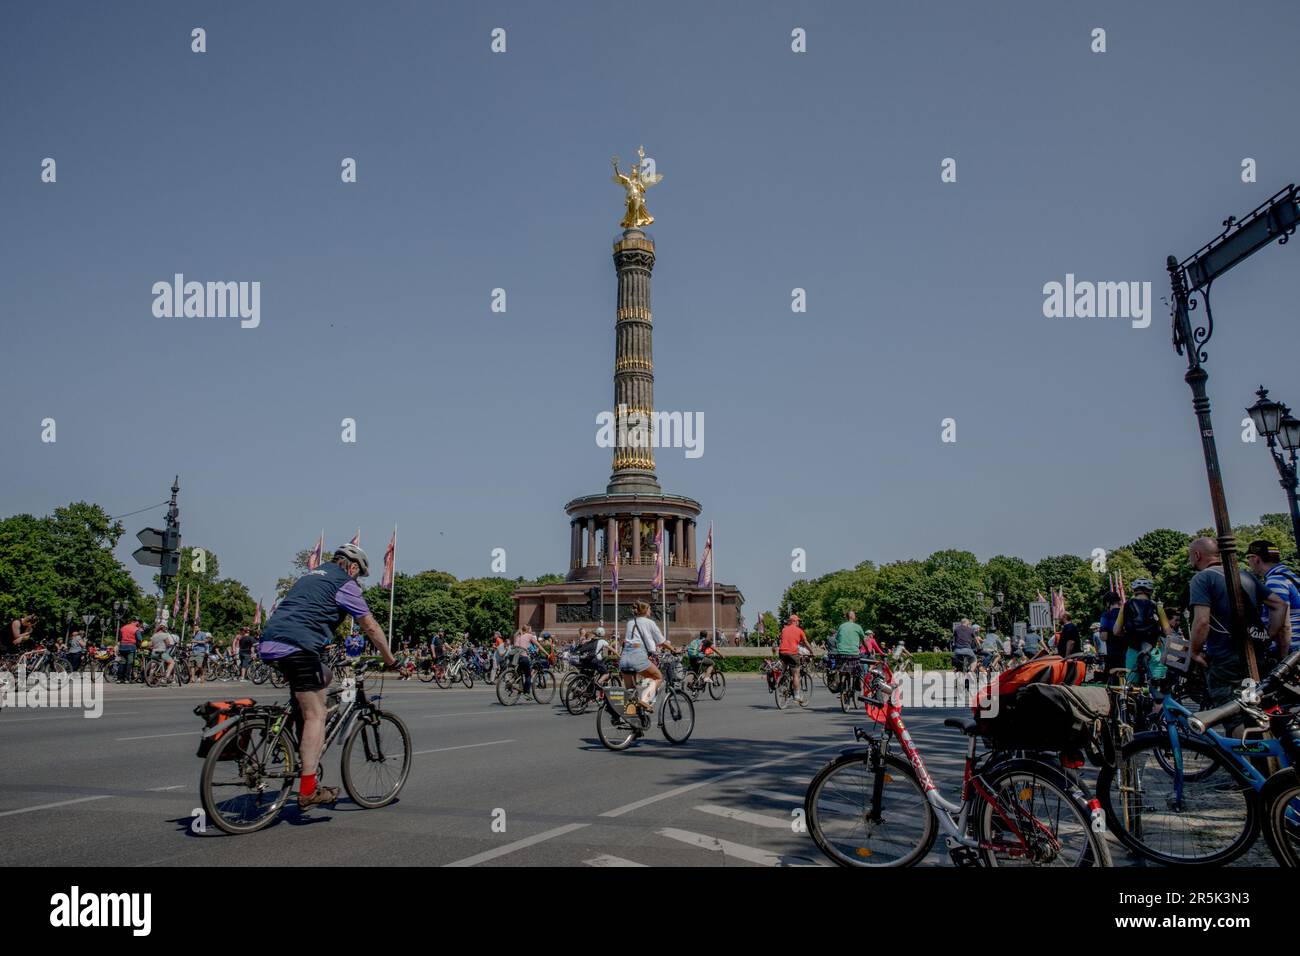 June 4, 2023, Berlin, Germany: Thousands of cyclists participated in the annual bike protest, the Sternfahrt, in Berlin on June 4, 2023. Participants called for protected bike lanes and safer streets around schools. Numerous roads in and around Berlin were closed to car traffic to accommodate the event, including sections of freeways. The action caused significant disruptions for motorists throughout the city. All routes converged at the Victory Column in Berlin's Tiergarten Park. Road closures were also implemented on the A113/A100 and A115 (AVUS) freeways. The General German Bicycle Club (AD Stock Photo